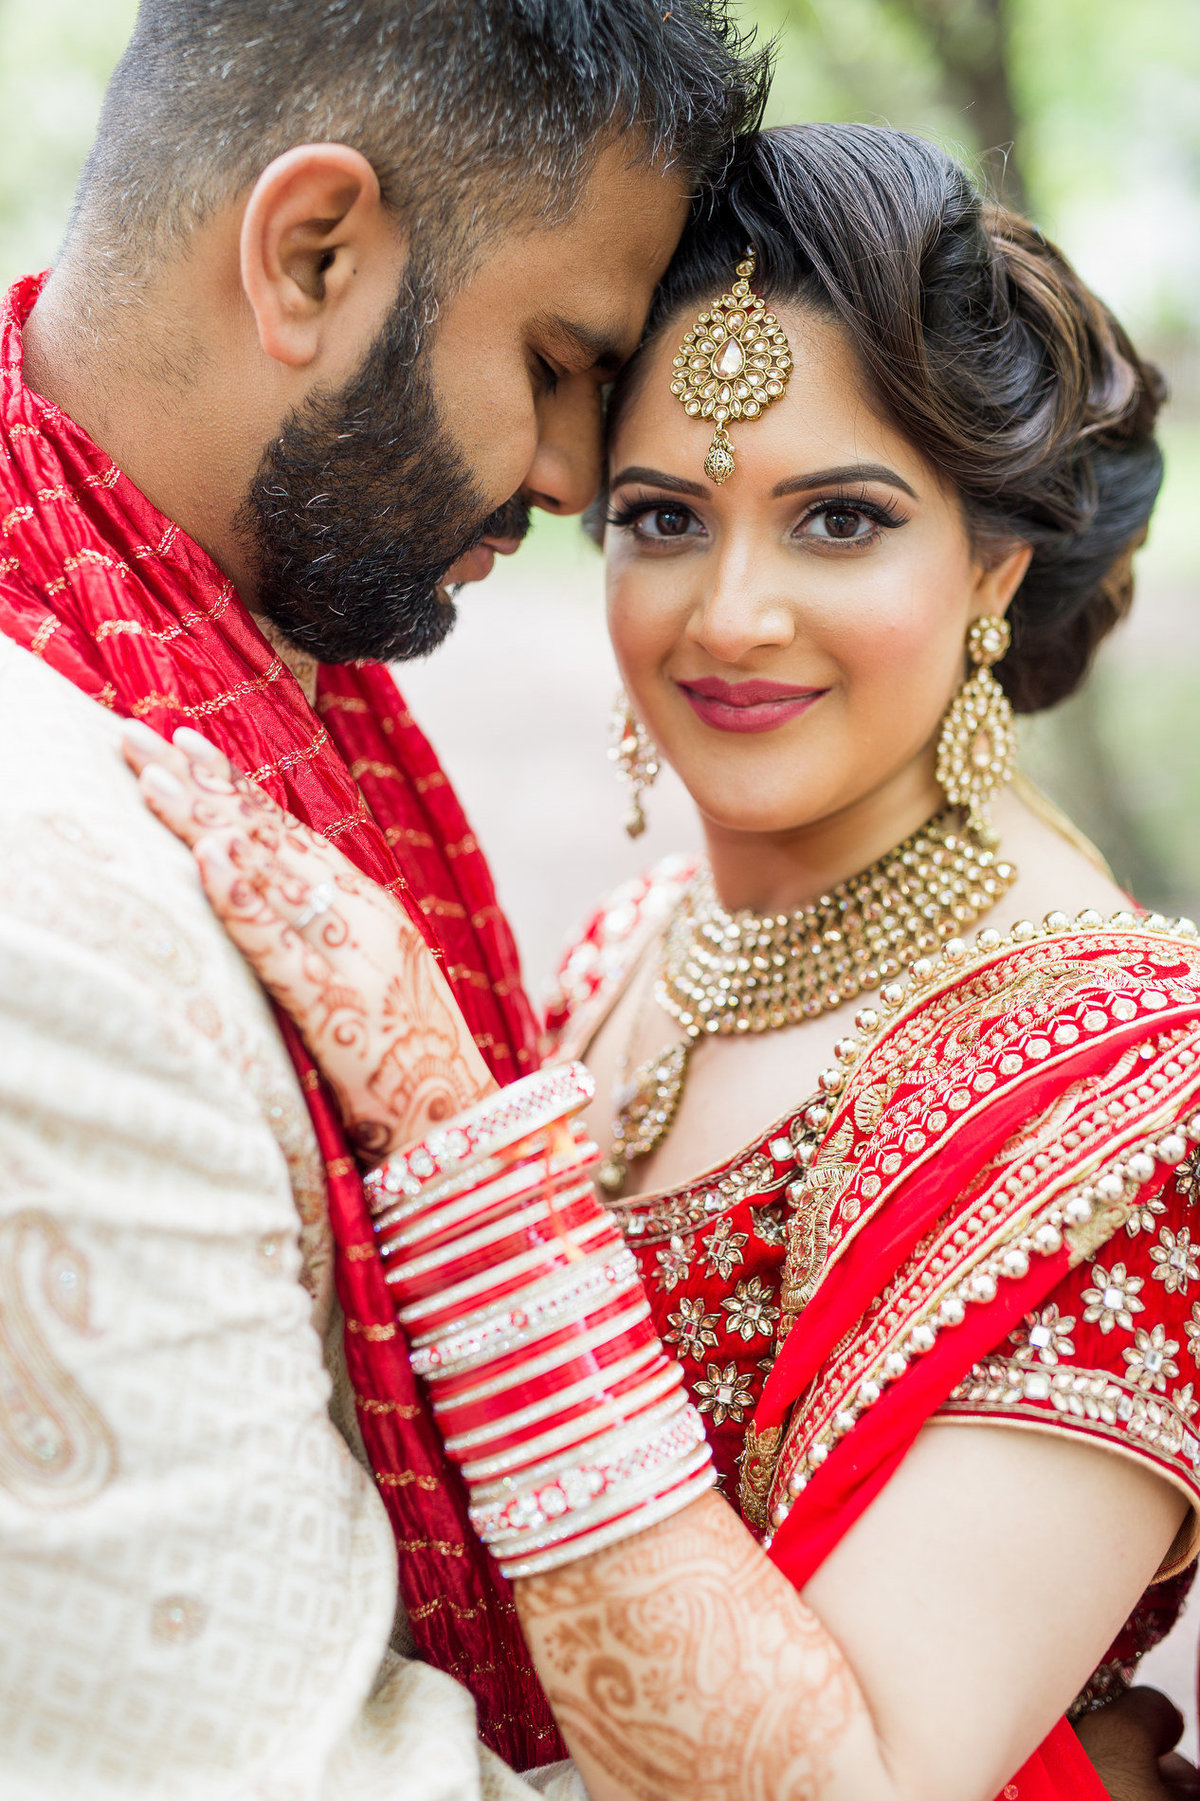 Hindu and Indian wedding guide All about Hindu wedding photography